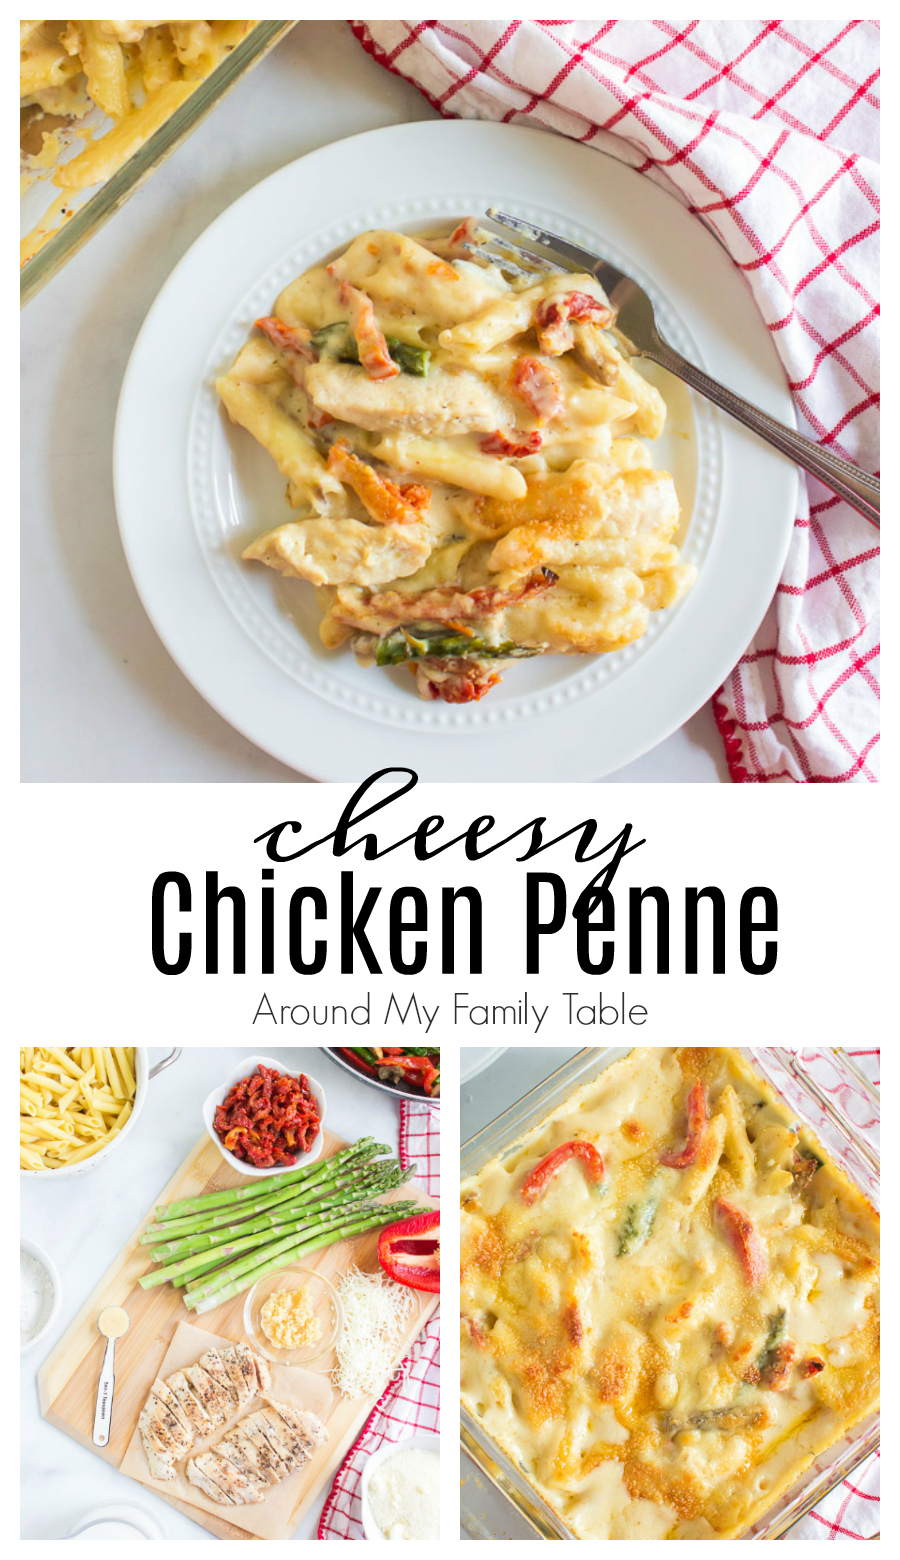 This Cheesy Chicken Penne is a rich and creamy pasta dish filled garlic, chicken, and tons of vegetables like asparagus, sun dried tomatoes, and red bell peppers.  It's the ultimate comfort food and makes a great freezer meal too. via @slingmama